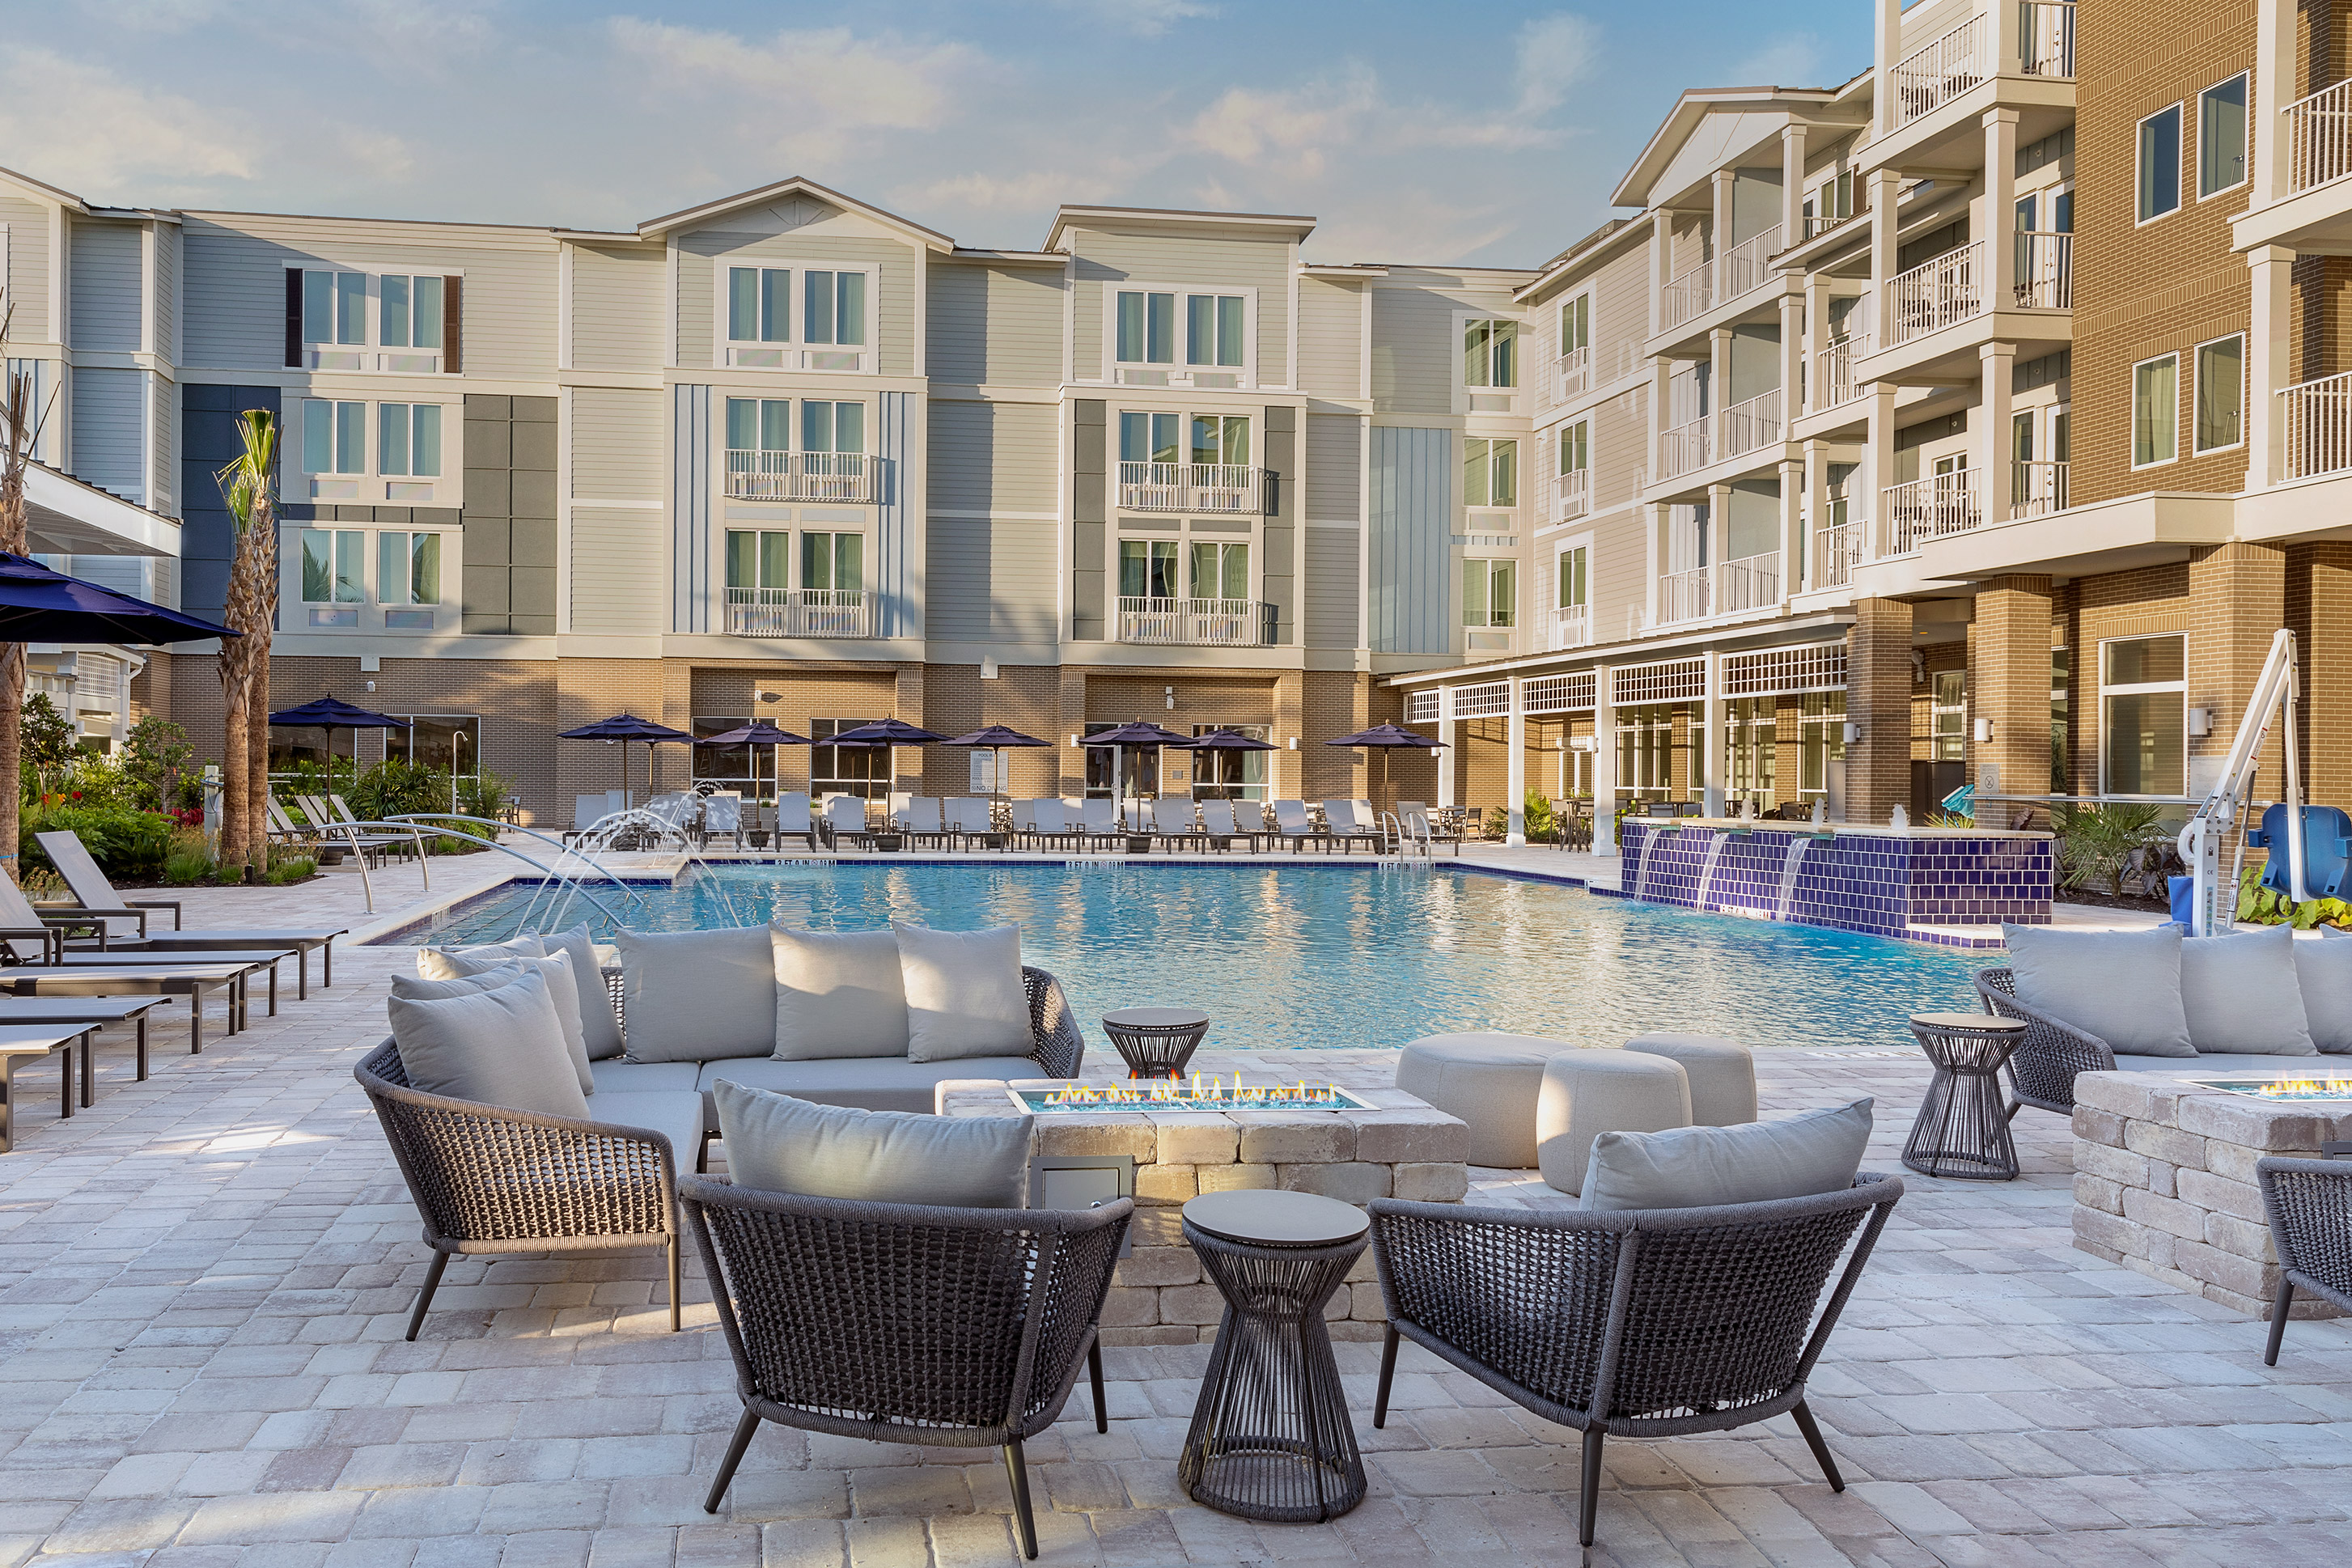 An image of the poolside at Courtyard and SpringHill Suites hotel.